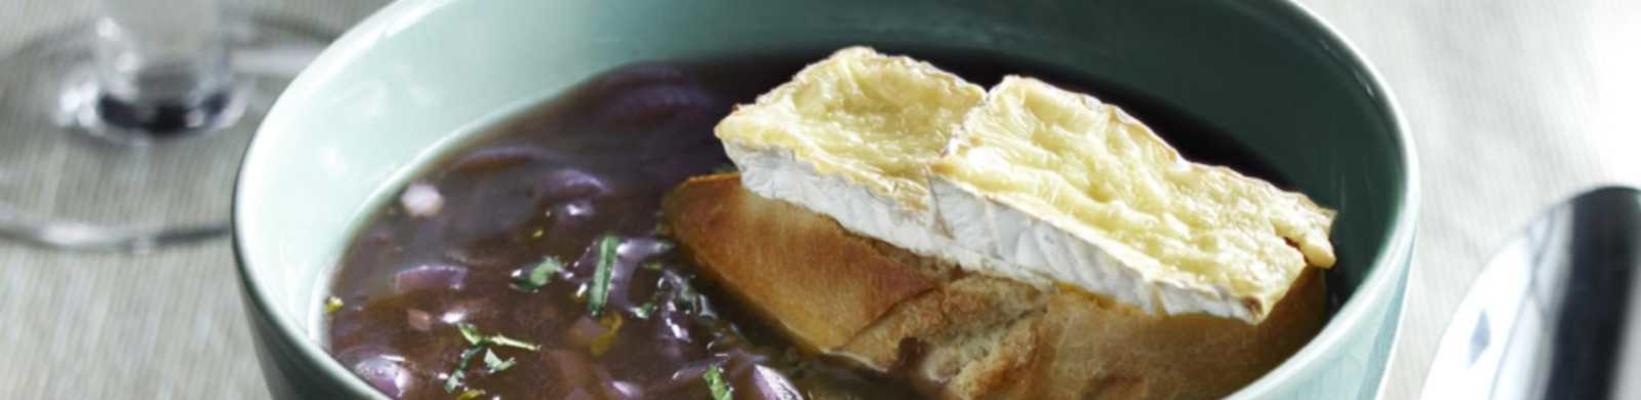 red onion soup with camembert crouton